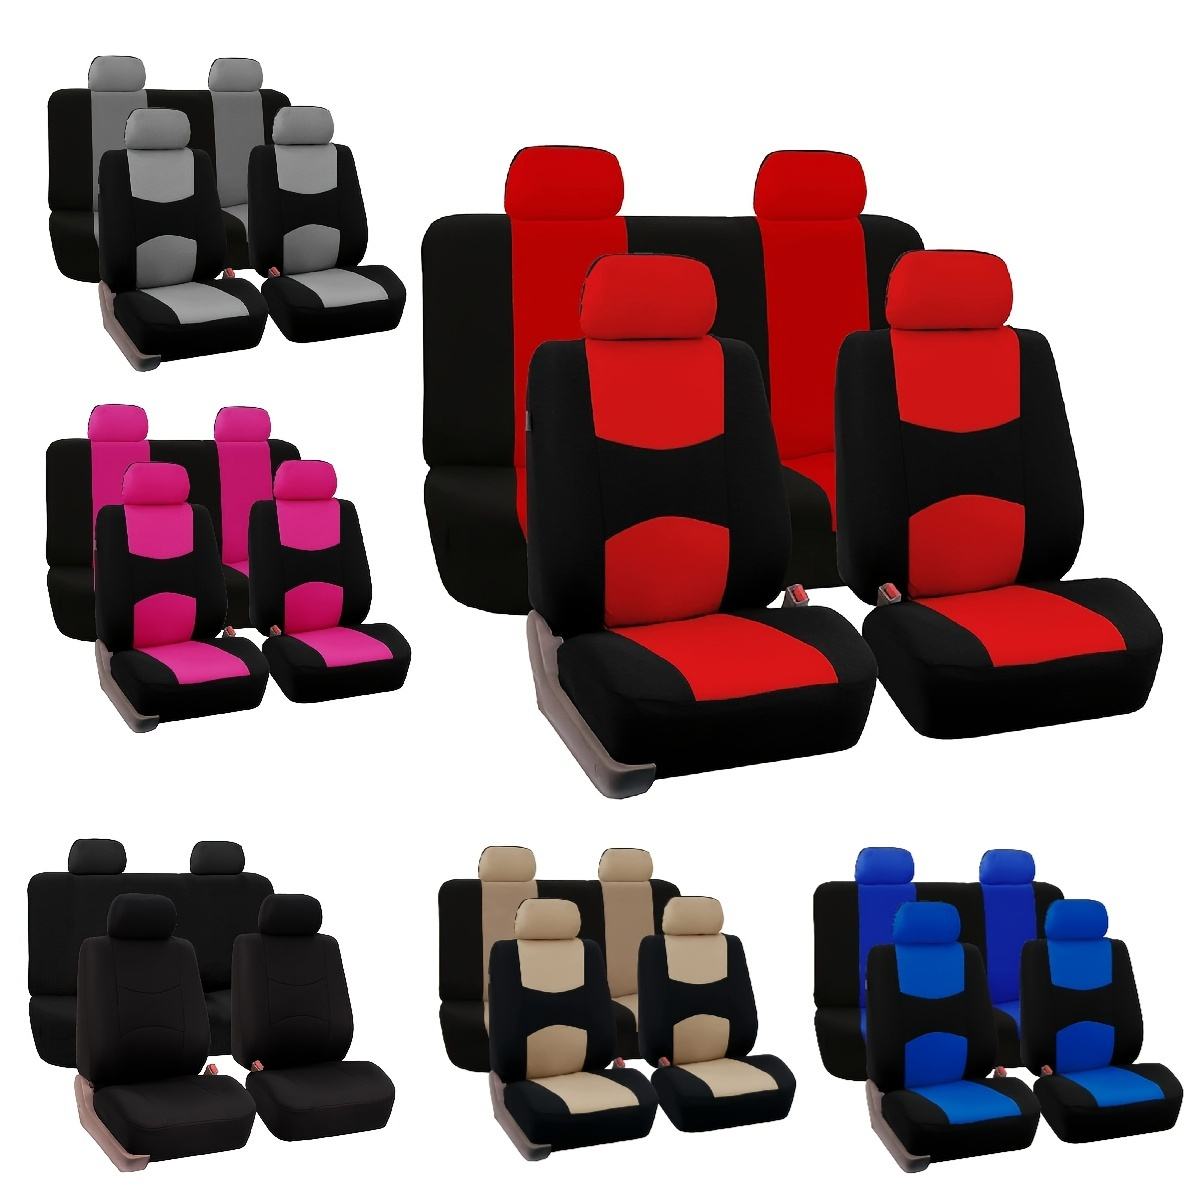 

Car Seat Cover For 5 Seats Universal Fit Seat Covers For Suv Interior Accessories Car Seat Protector For Cars Trucks And Suv